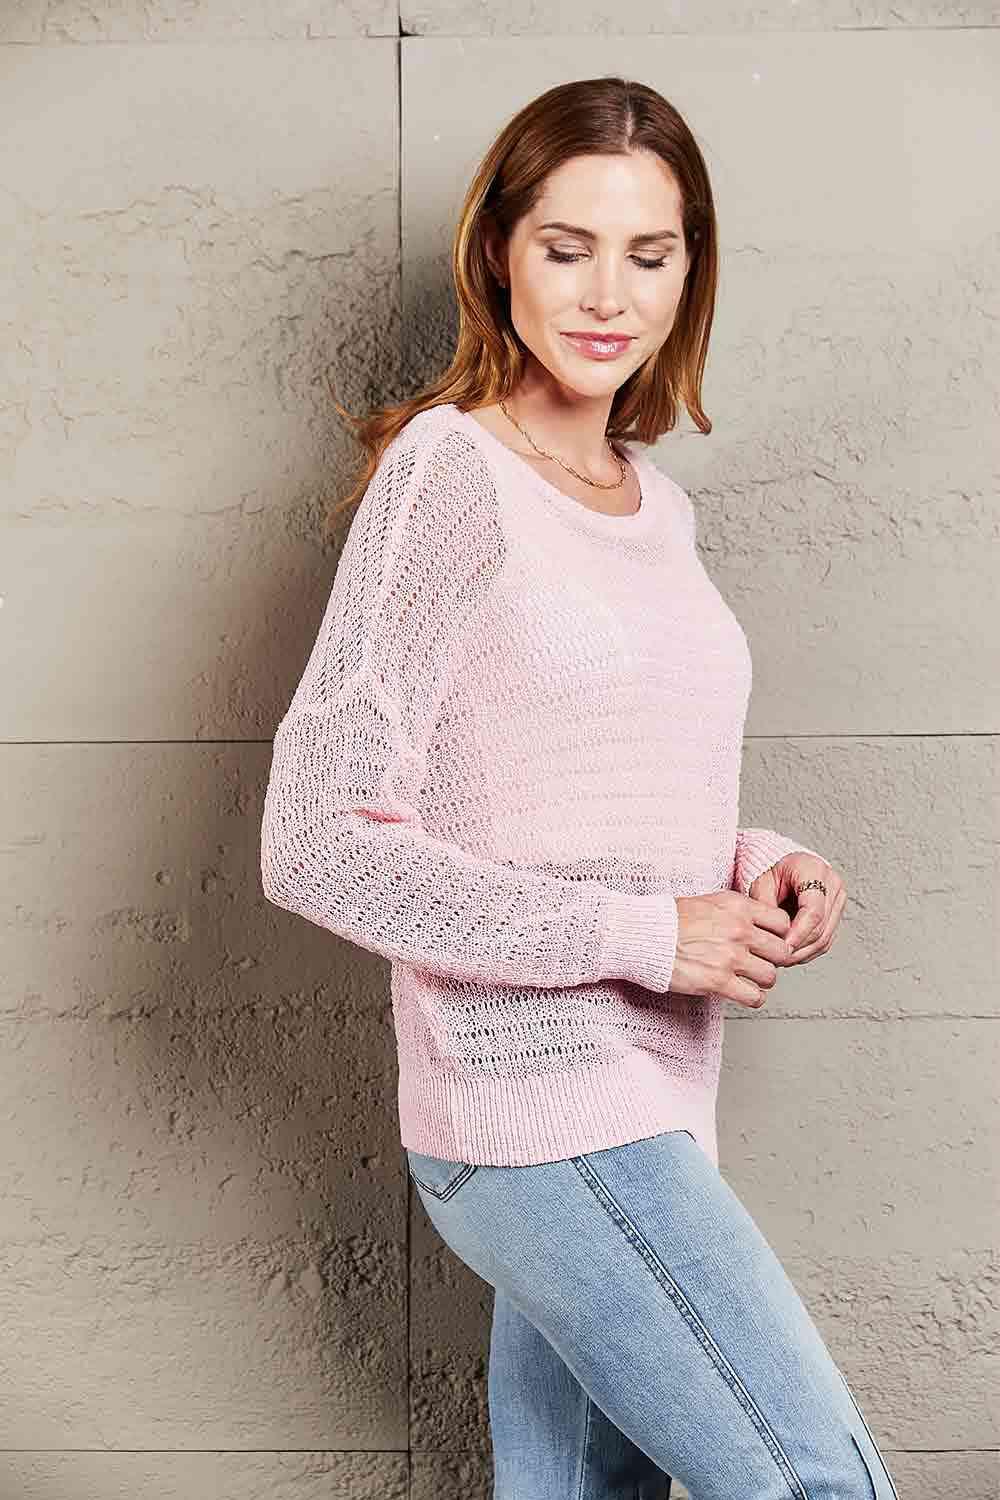 Double Take Openwork Round Neck Dropped Shoulder Knit Top - Lab Fashion, Home & Health